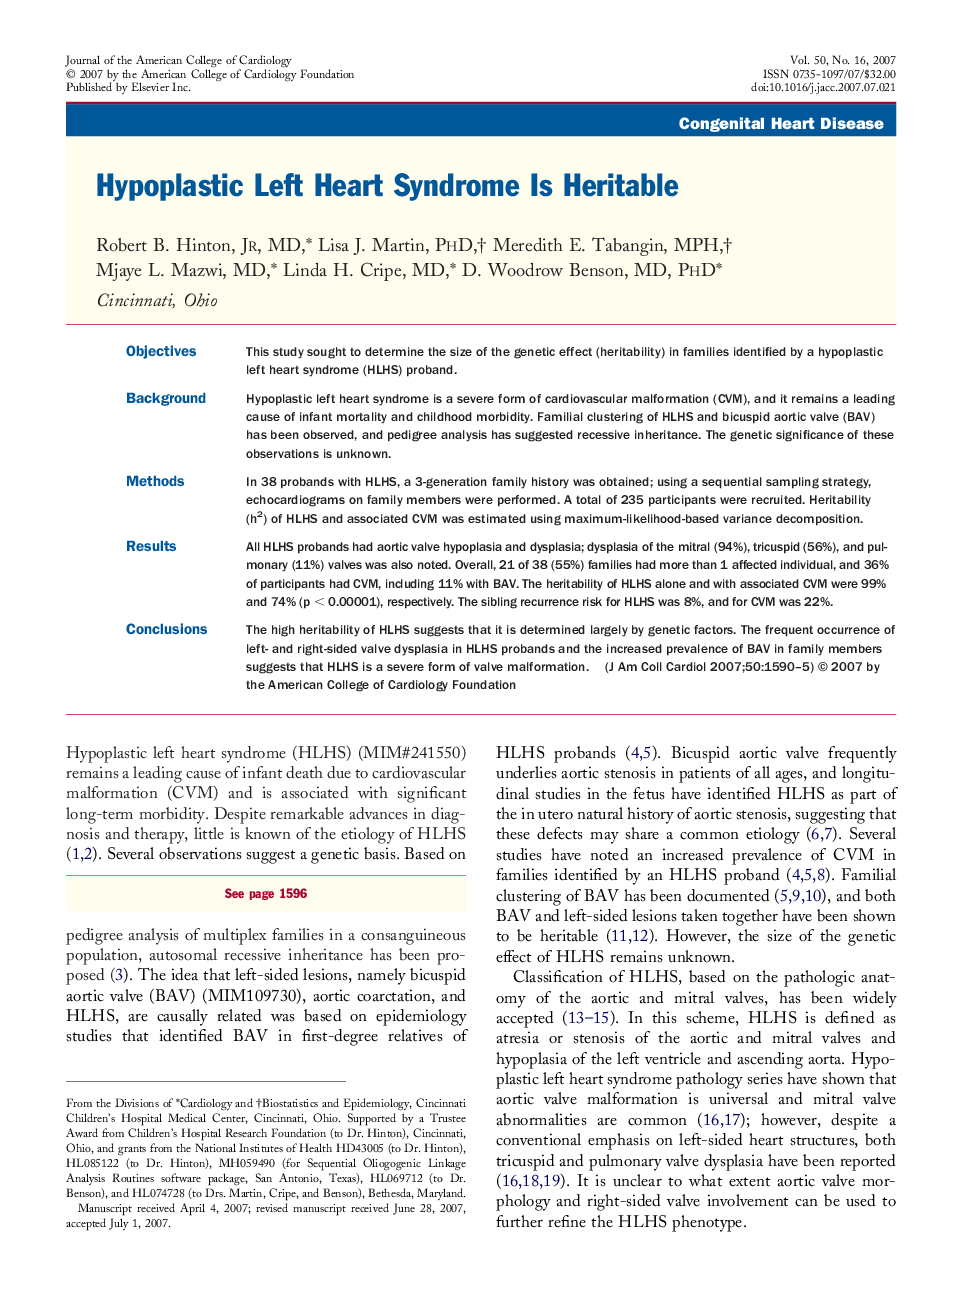 Hypoplastic Left Heart Syndrome Is Heritable 